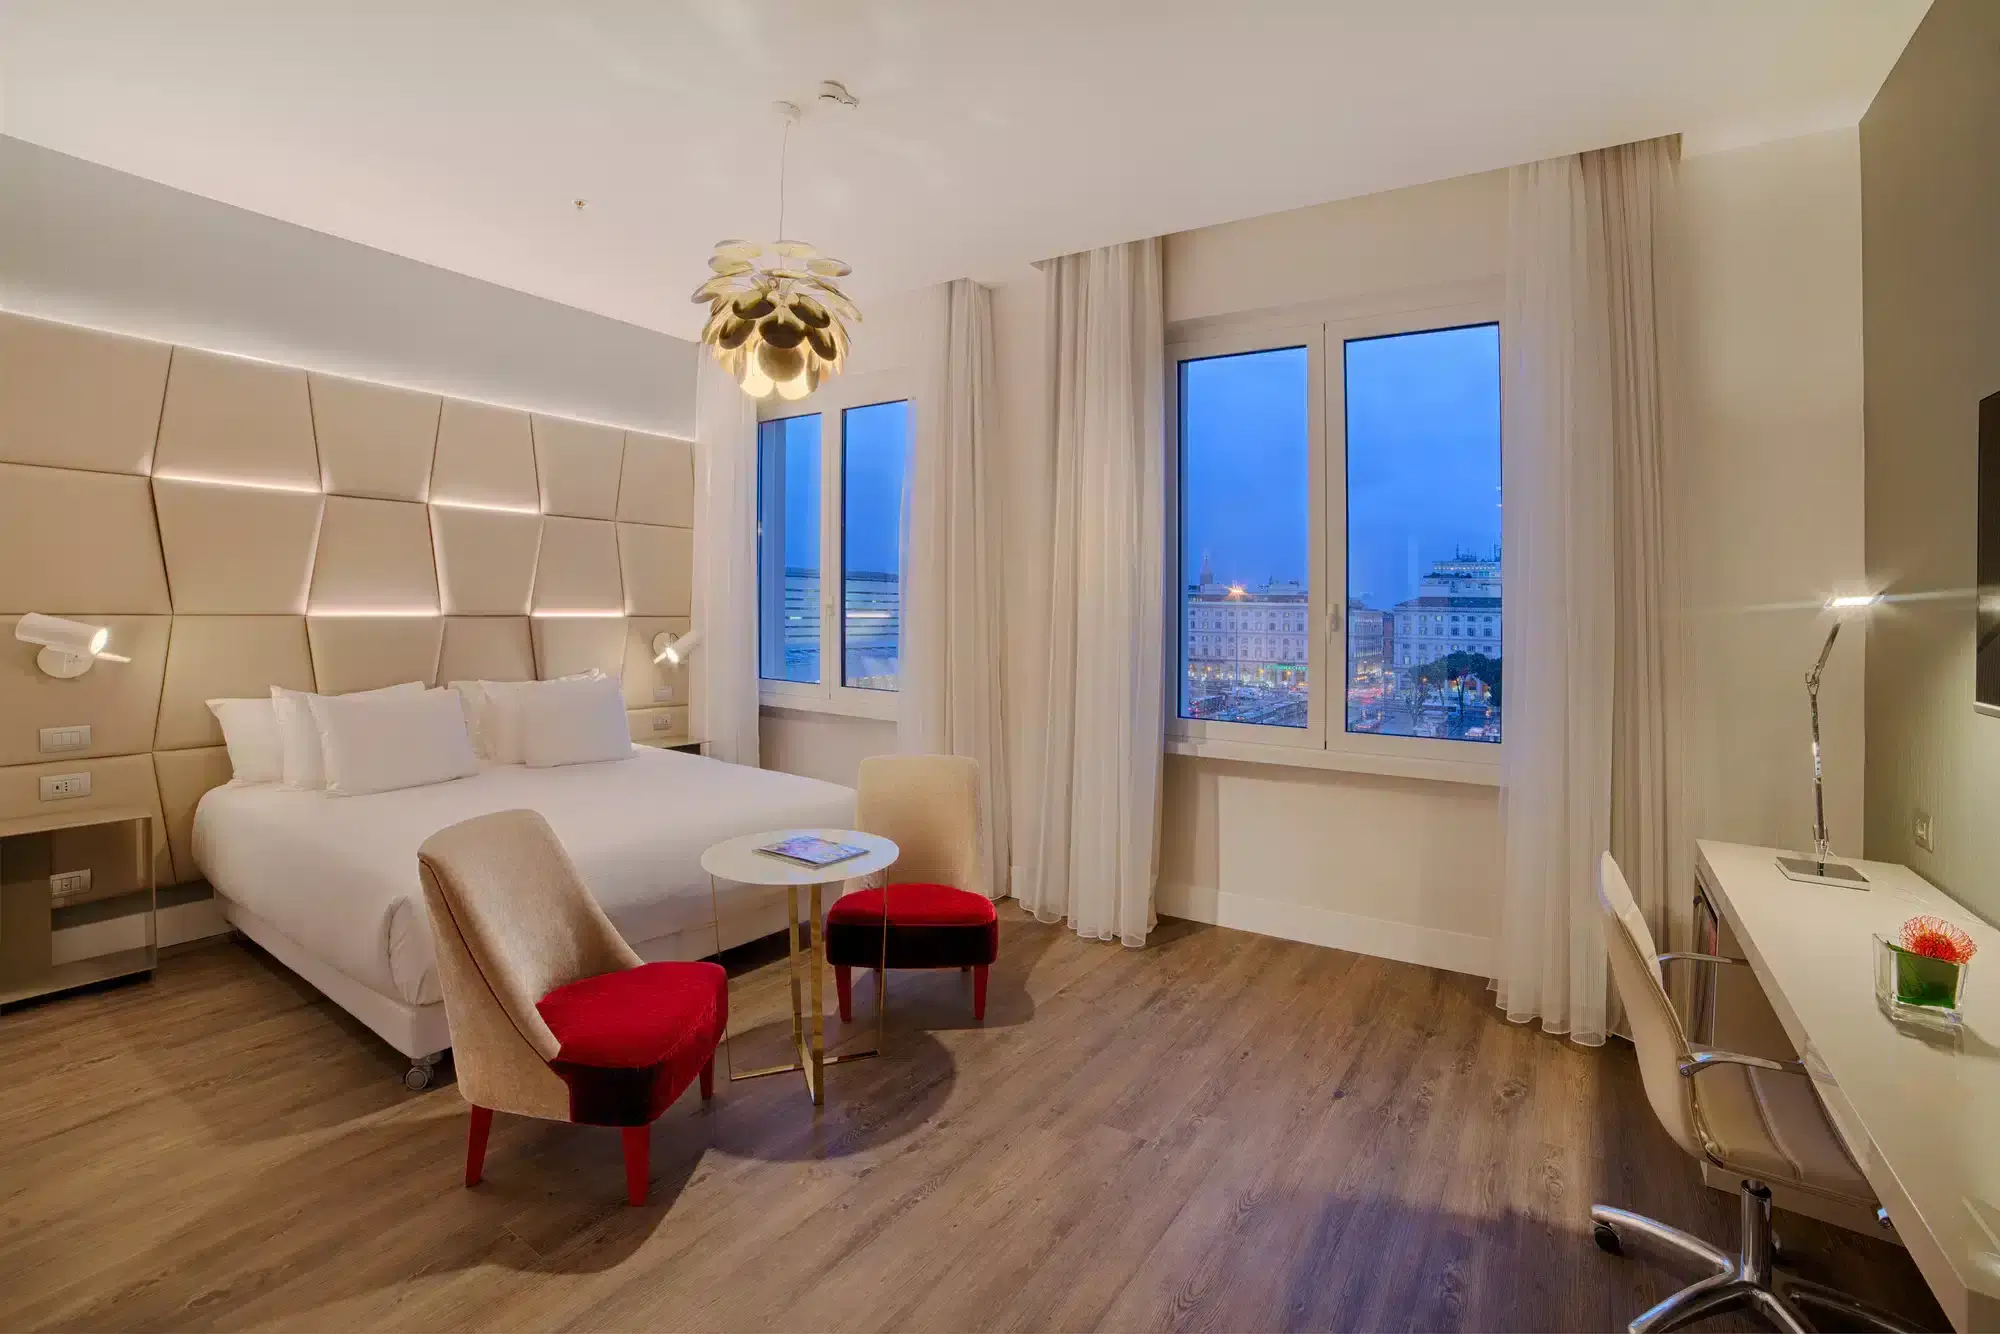 Image of a hotel room with a large double bed, red seating and a large window looking out to the night sky